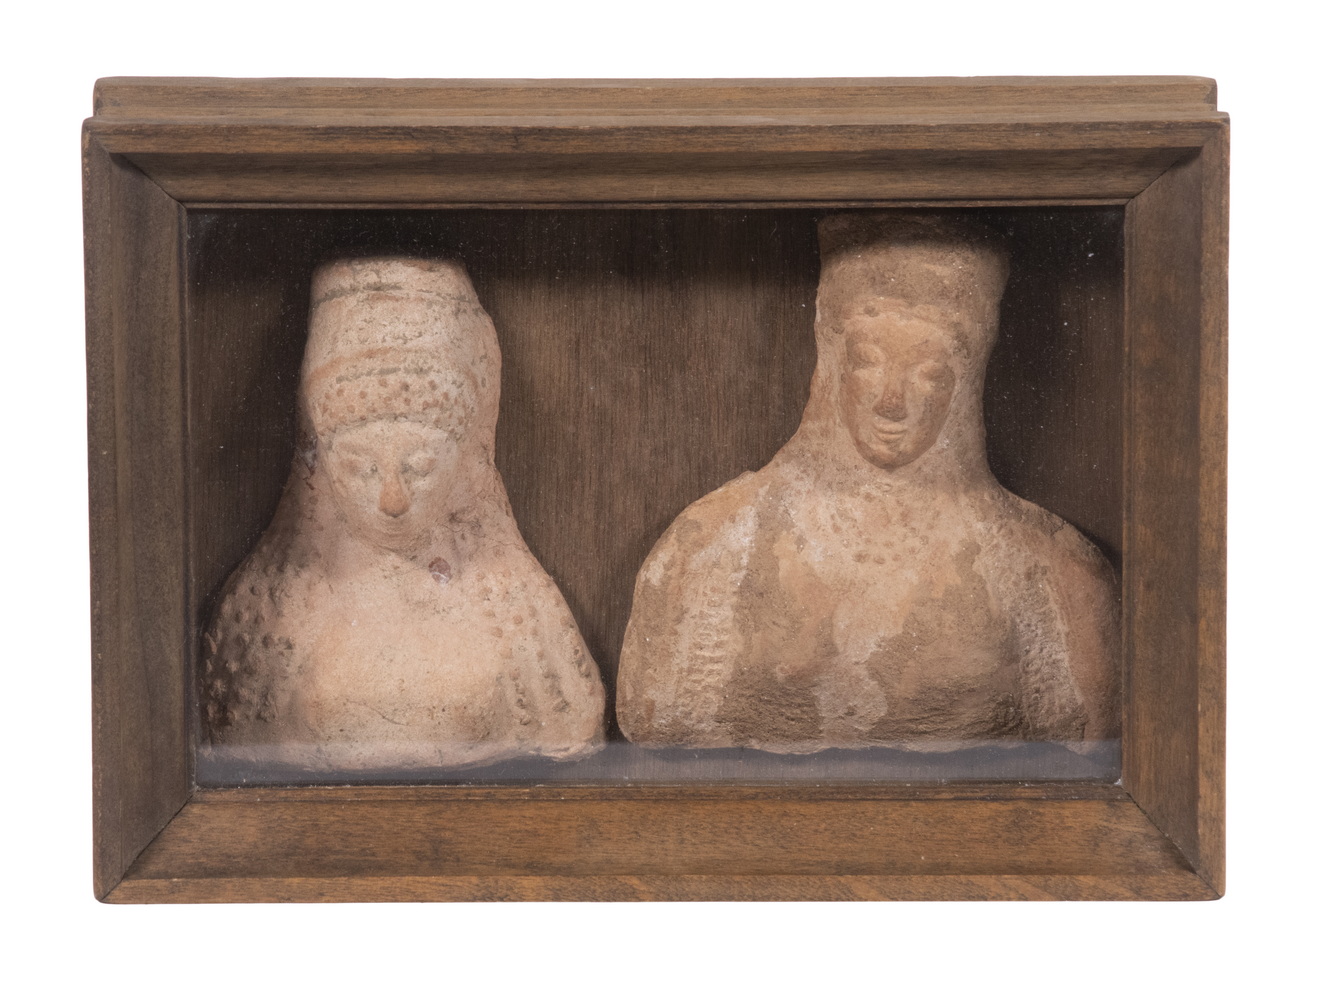  2 ETRUSCAN CLAY BUSTS OF WOMEN 302f12